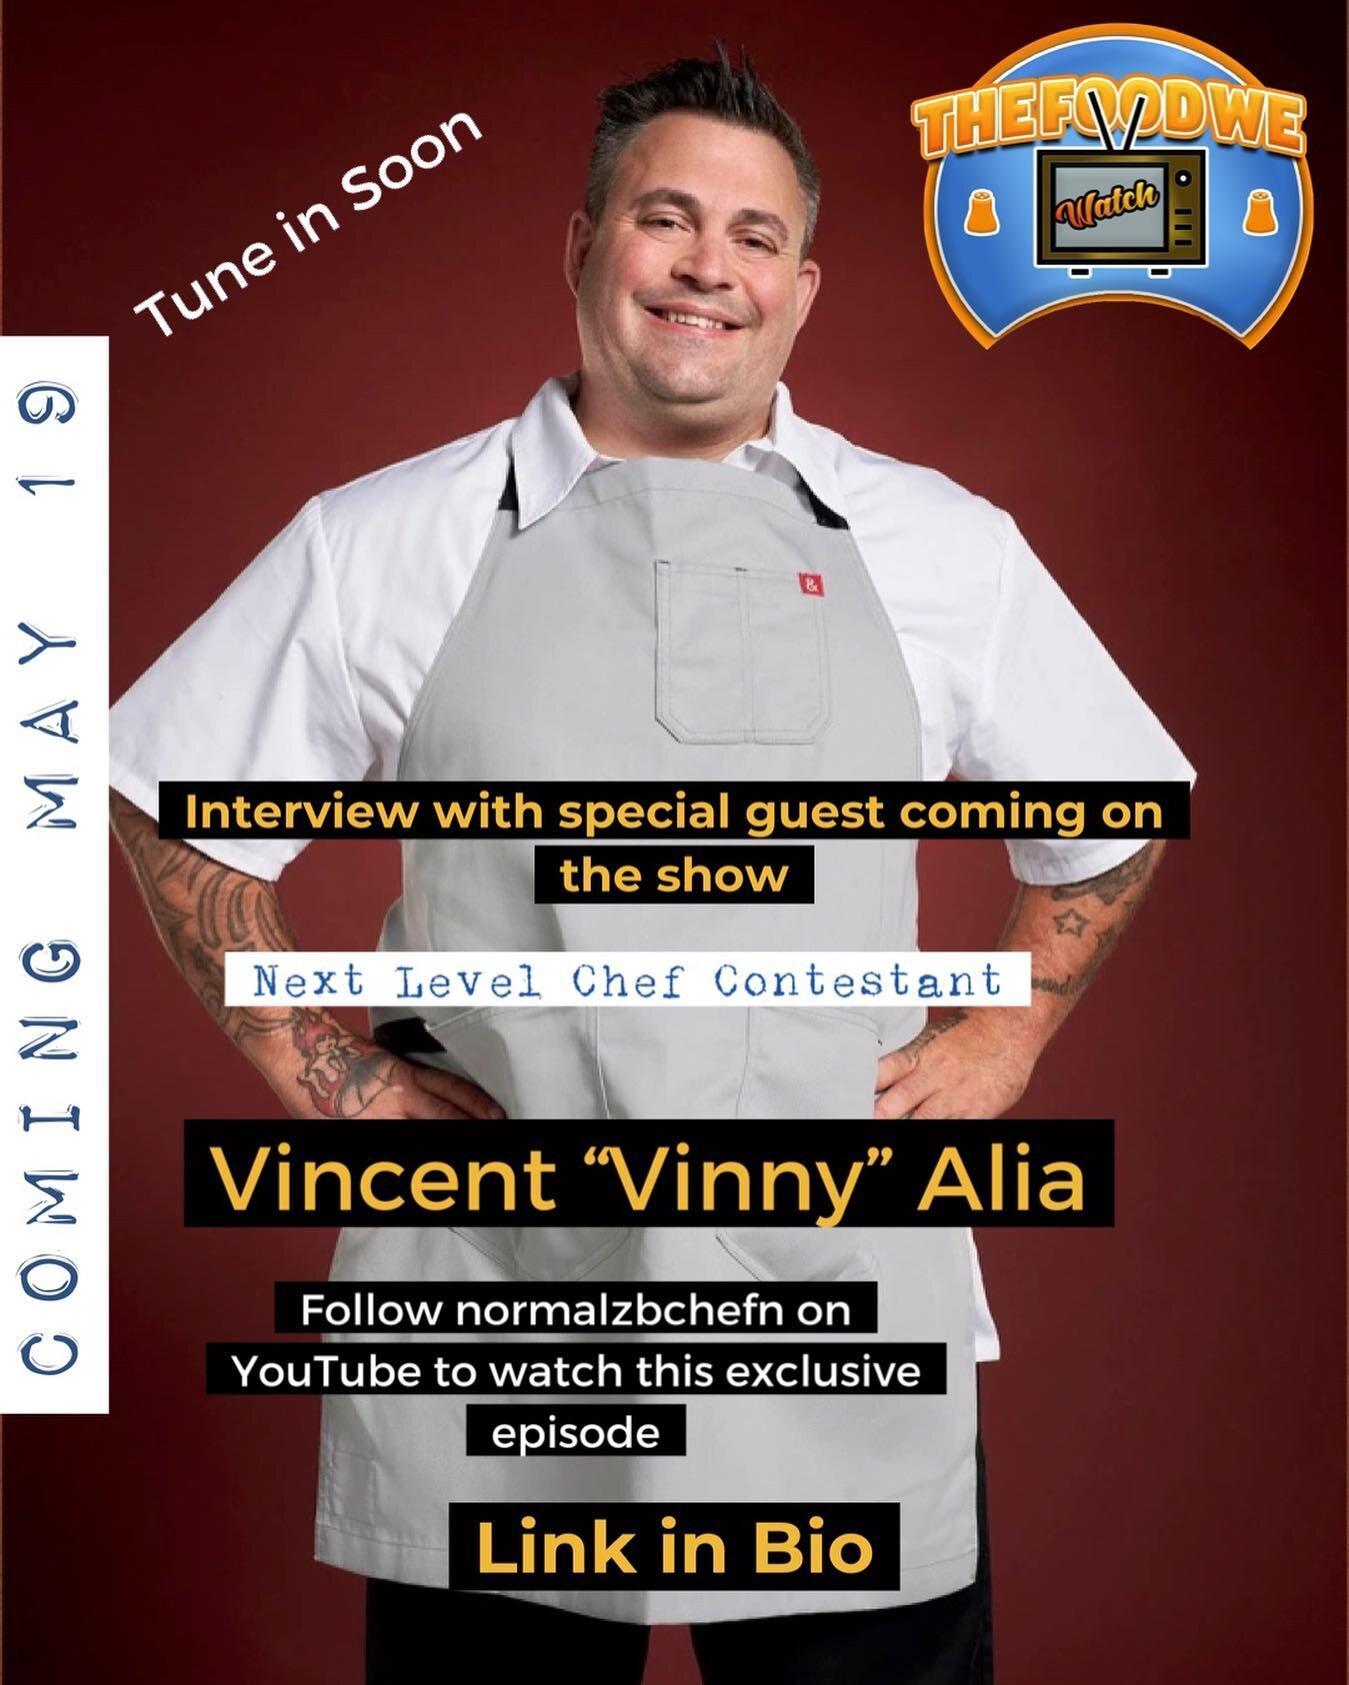 The firefighter Vinnie, started his cooking in the firehouse and then entered the competition called &ldquo;Next Level Chef&rdquo;. Hear his story here @thefoodwewatchpod dropping May 19th at 12pm @vindog9 @nextlevelcheffox @foodclubfox 
@normalzbche